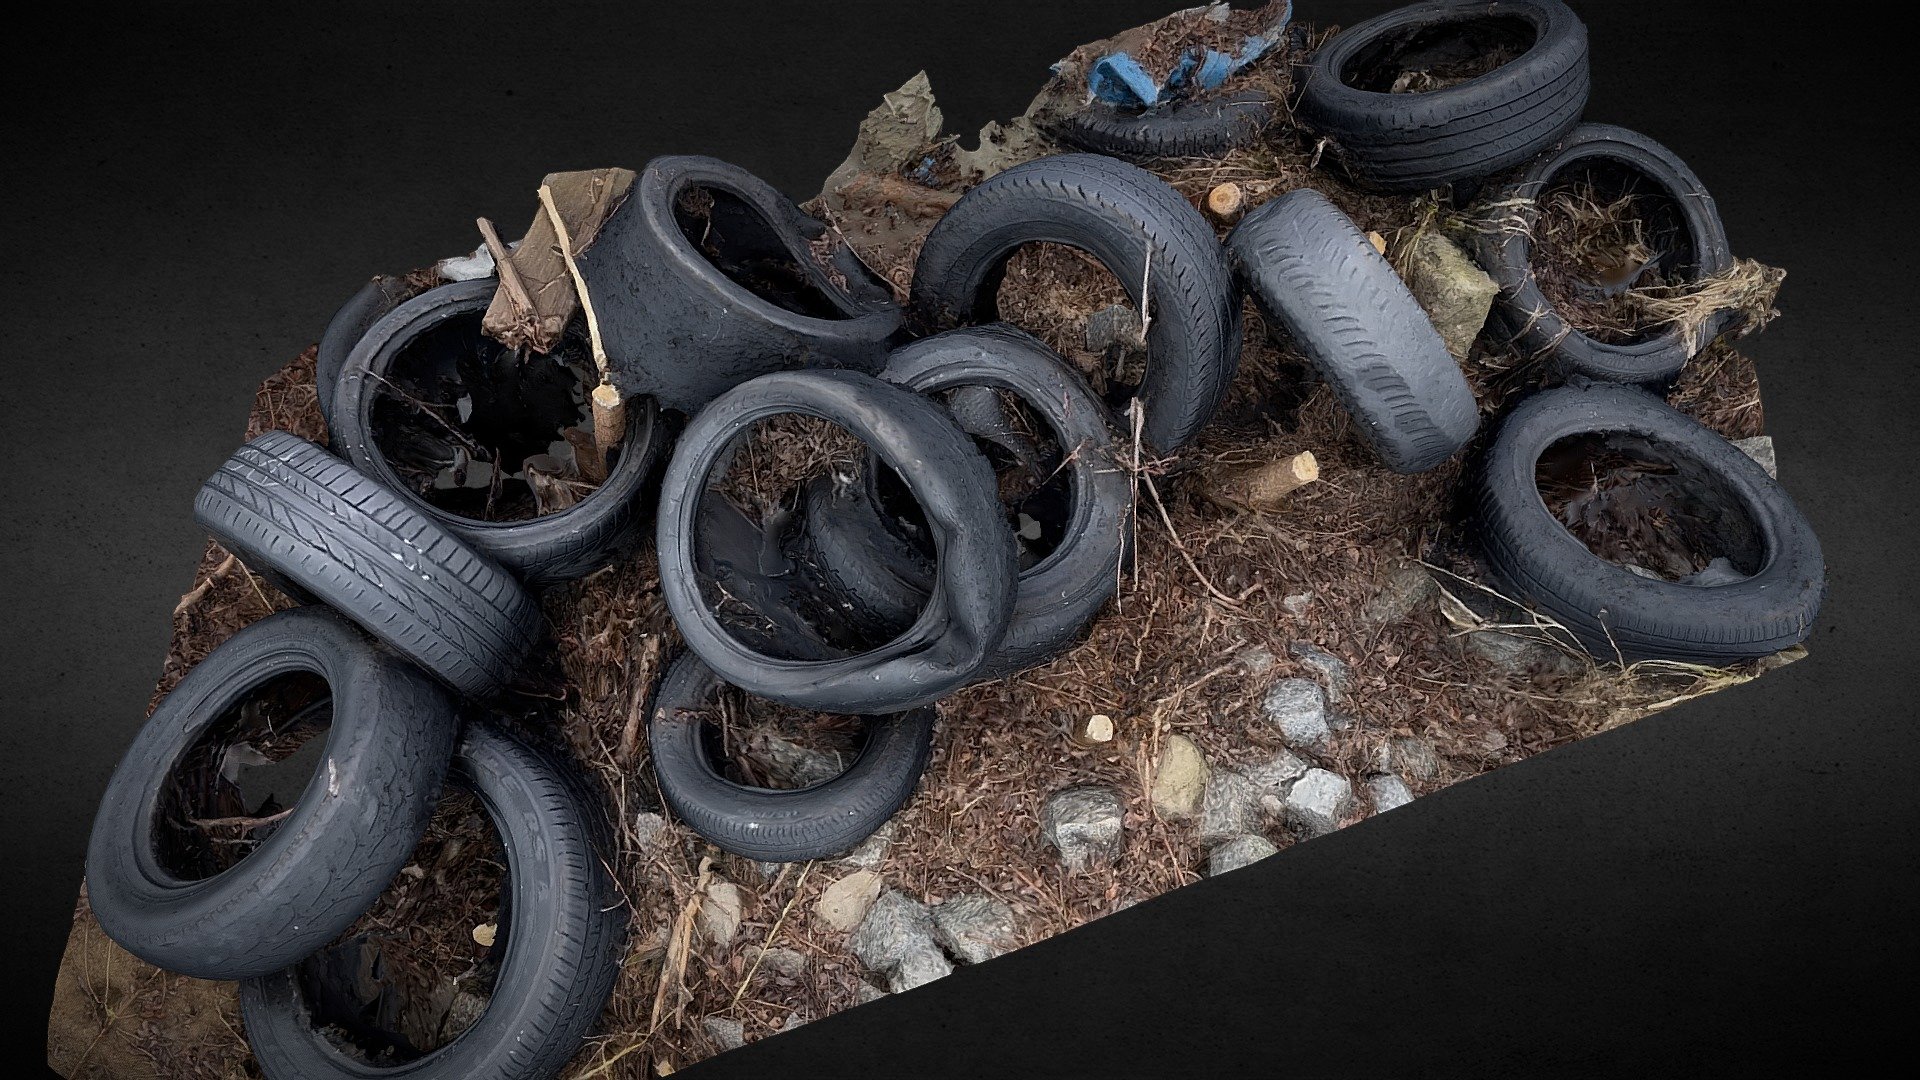 tires trash photoscan - photogrammetry
made on canon mkII lens 35mm
maps: diffuse 4k, ao
cleaned geometry, no retopology
textures 4k: roughness, nrm, bump
https://drive.google.com/file/d/1WPNW-SEvs2K4zK9TzS3dUb11bnuQoOXW/view?usp=sharing - tires trash photoscan - Buy Royalty Free 3D model by looppy 3d model